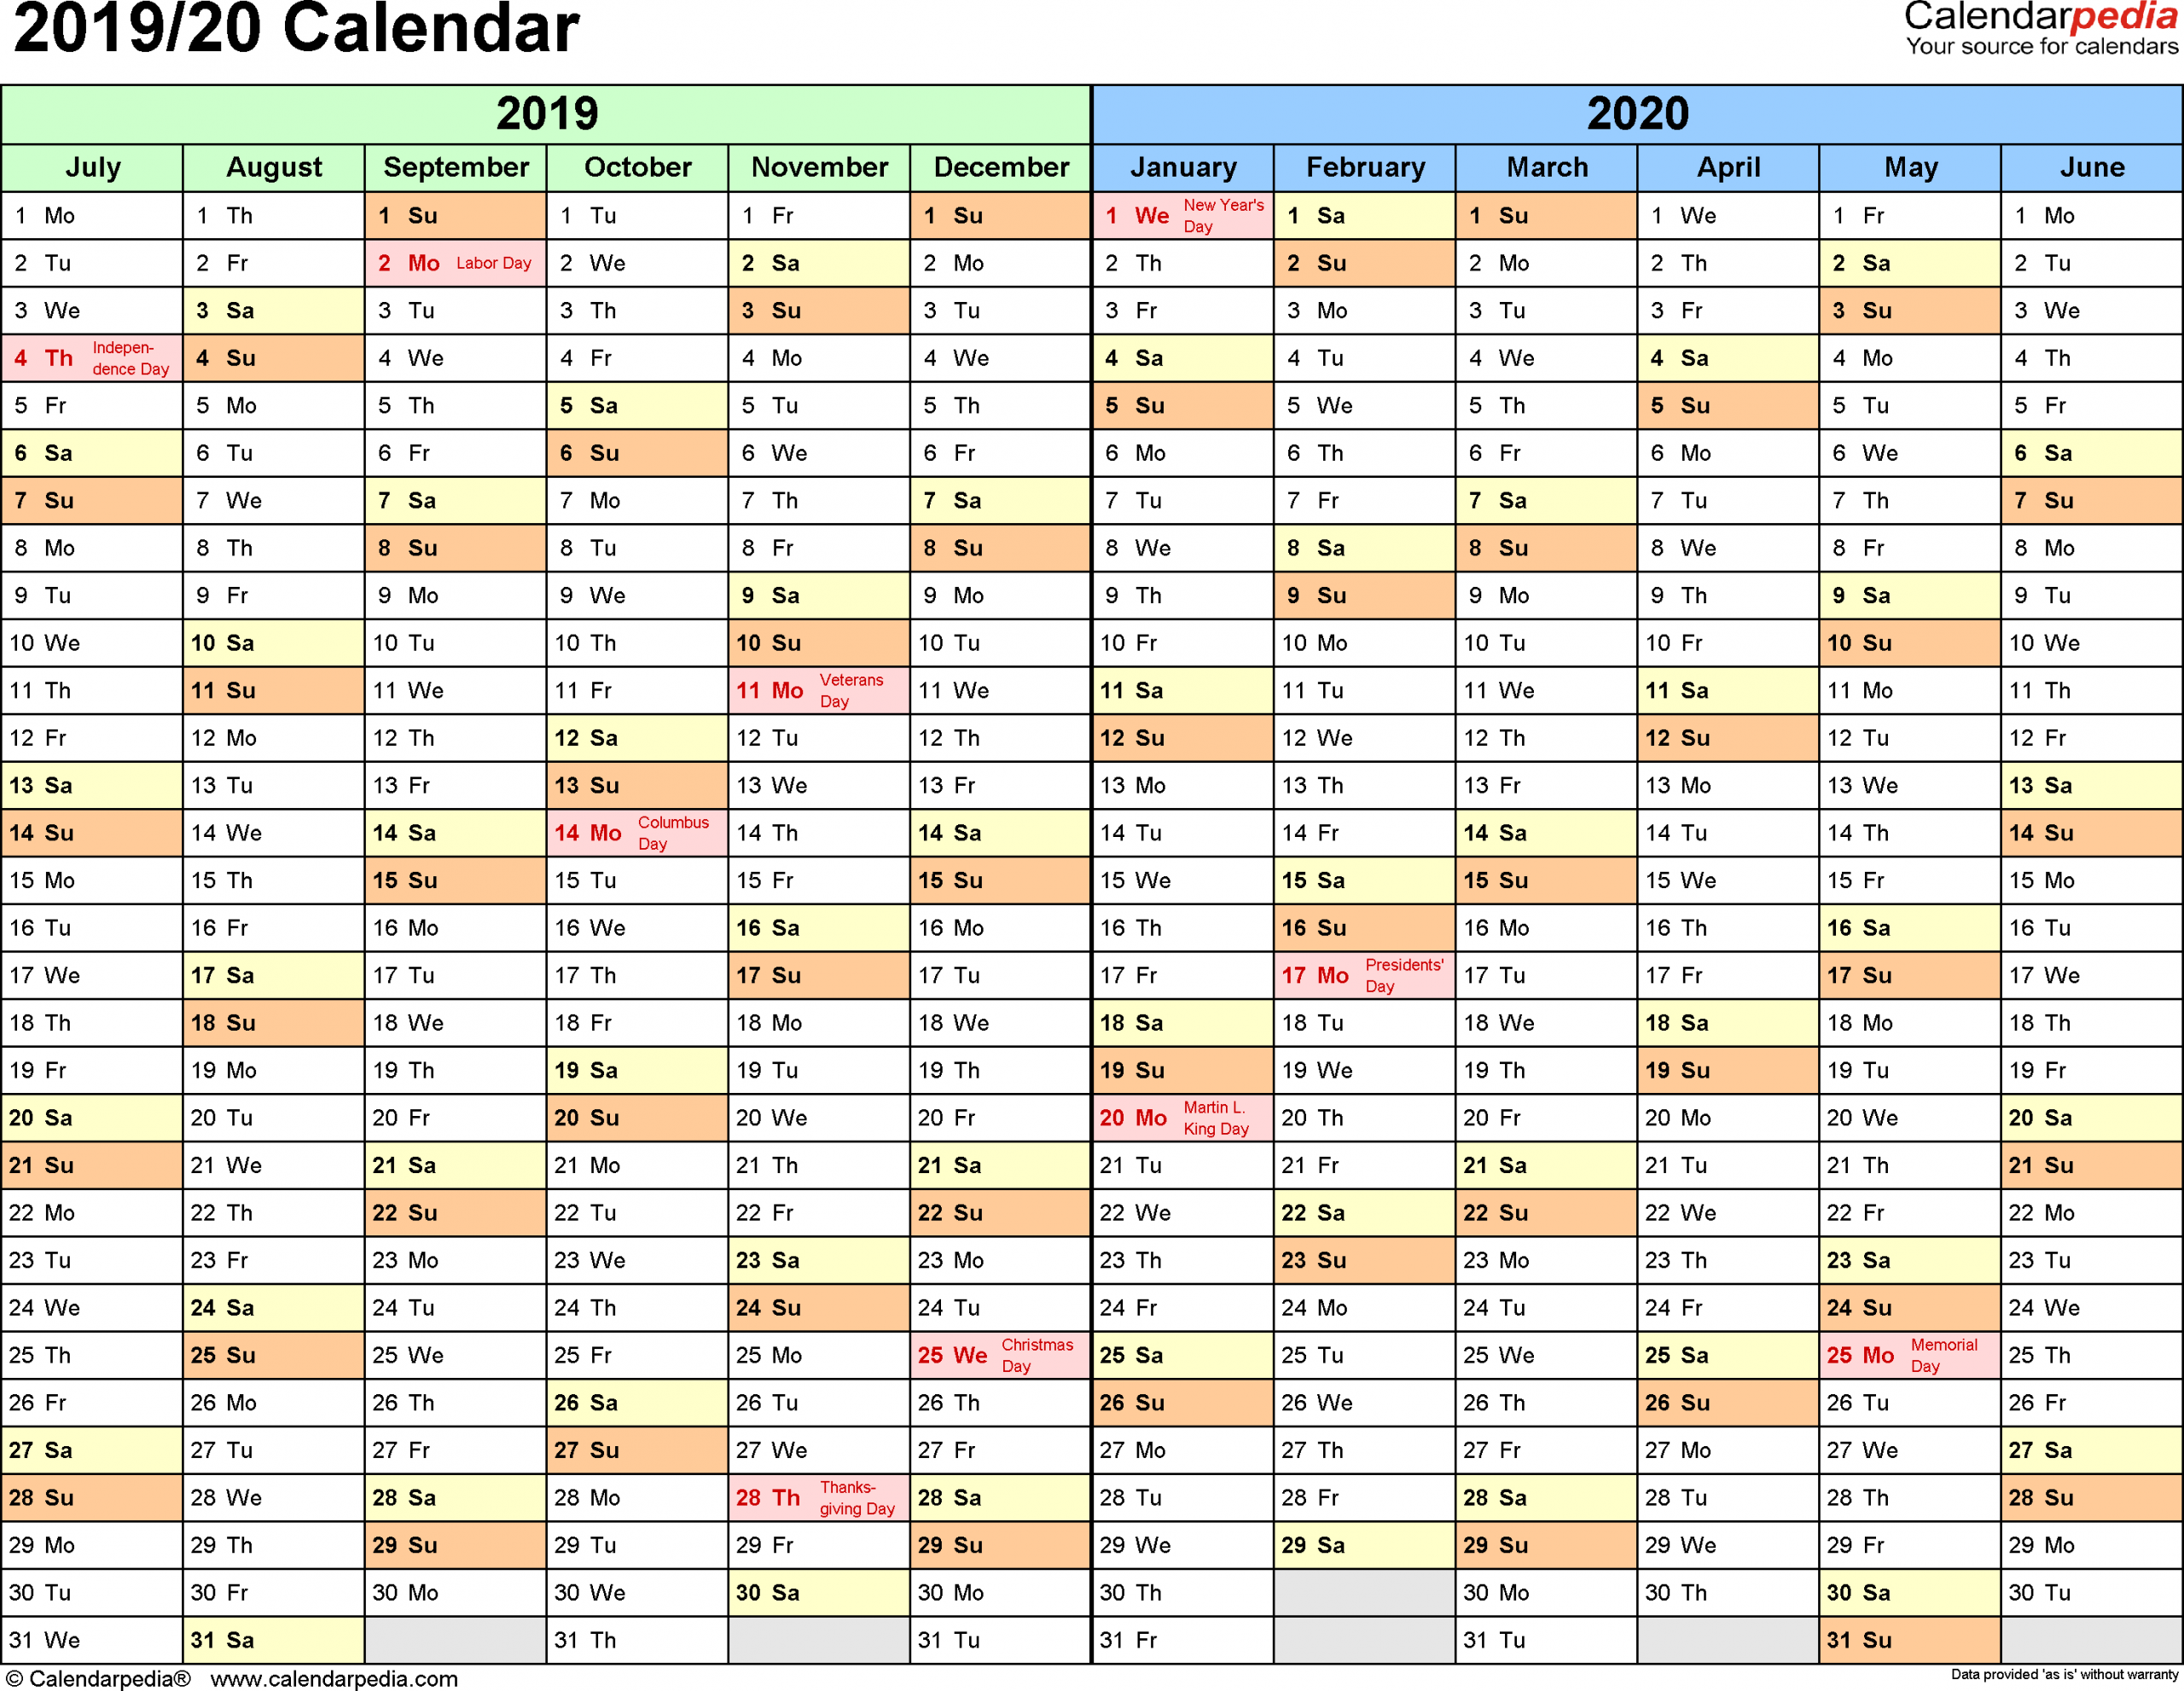 Split Year Calendars 2019/2020 (July To June) - Word Templates